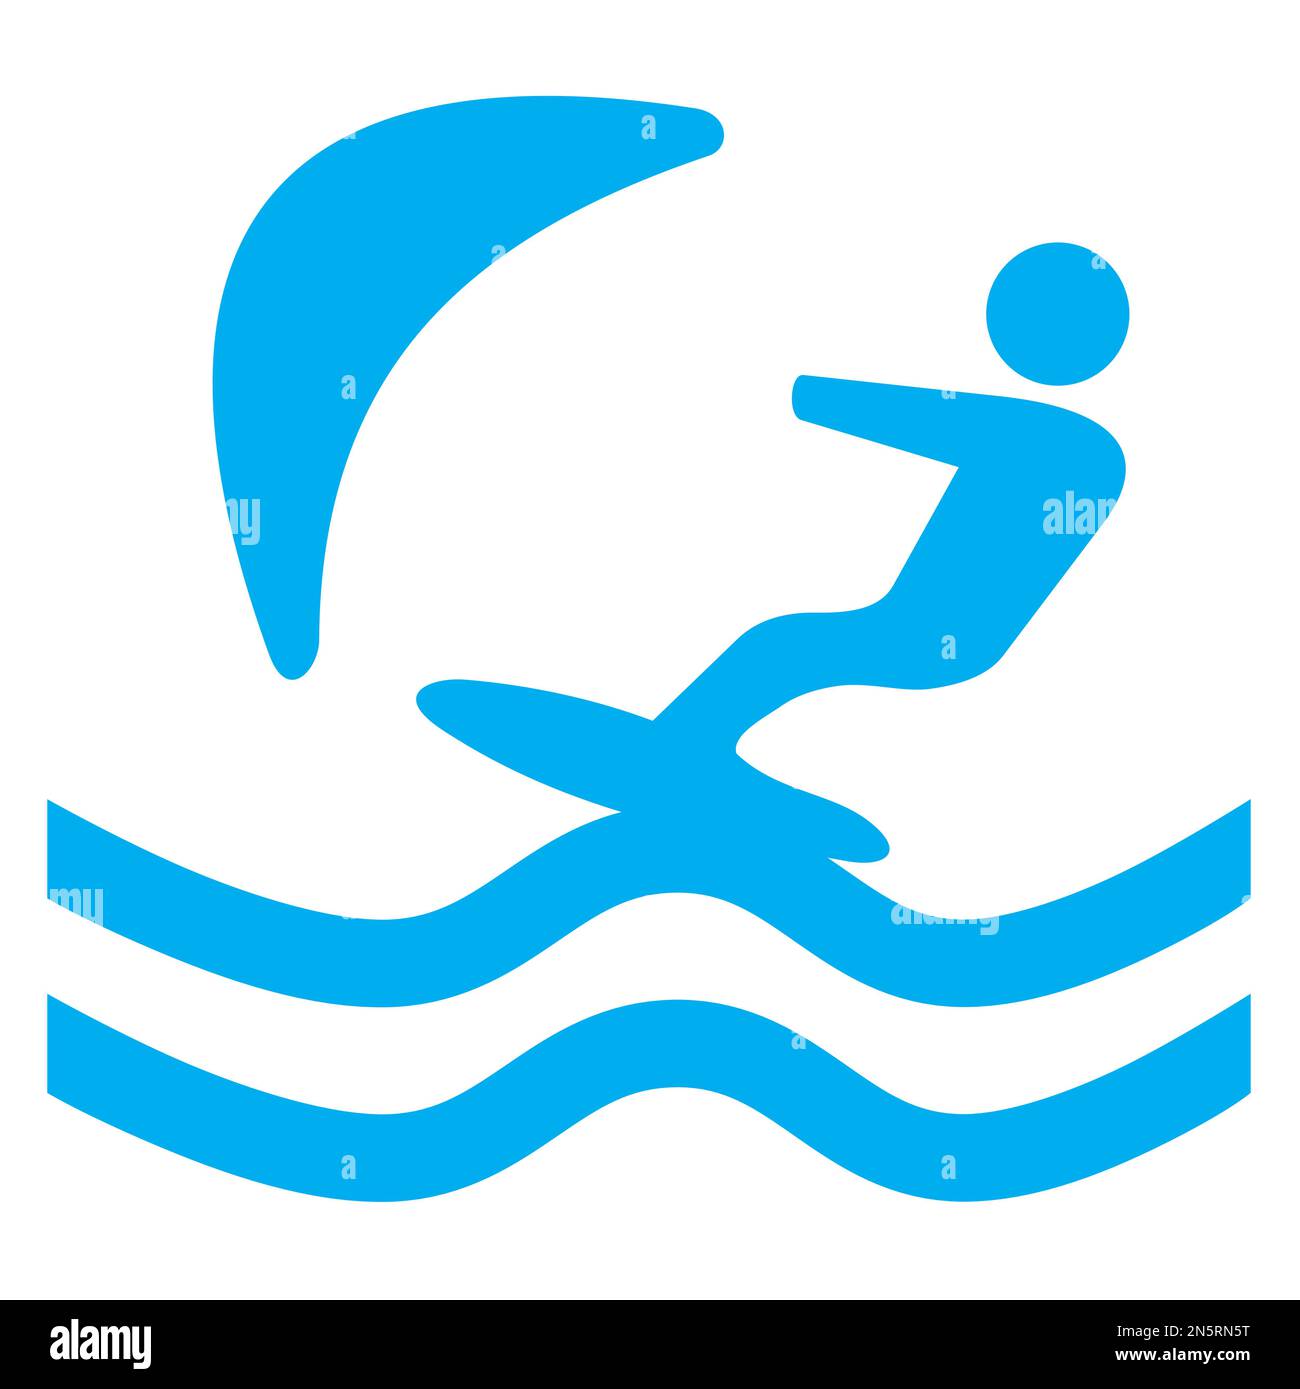 Blue and white vector graphic of a map symbol for board based water activities. It consists of a blue silhouette of a windsurfer on a white background Stock Vector